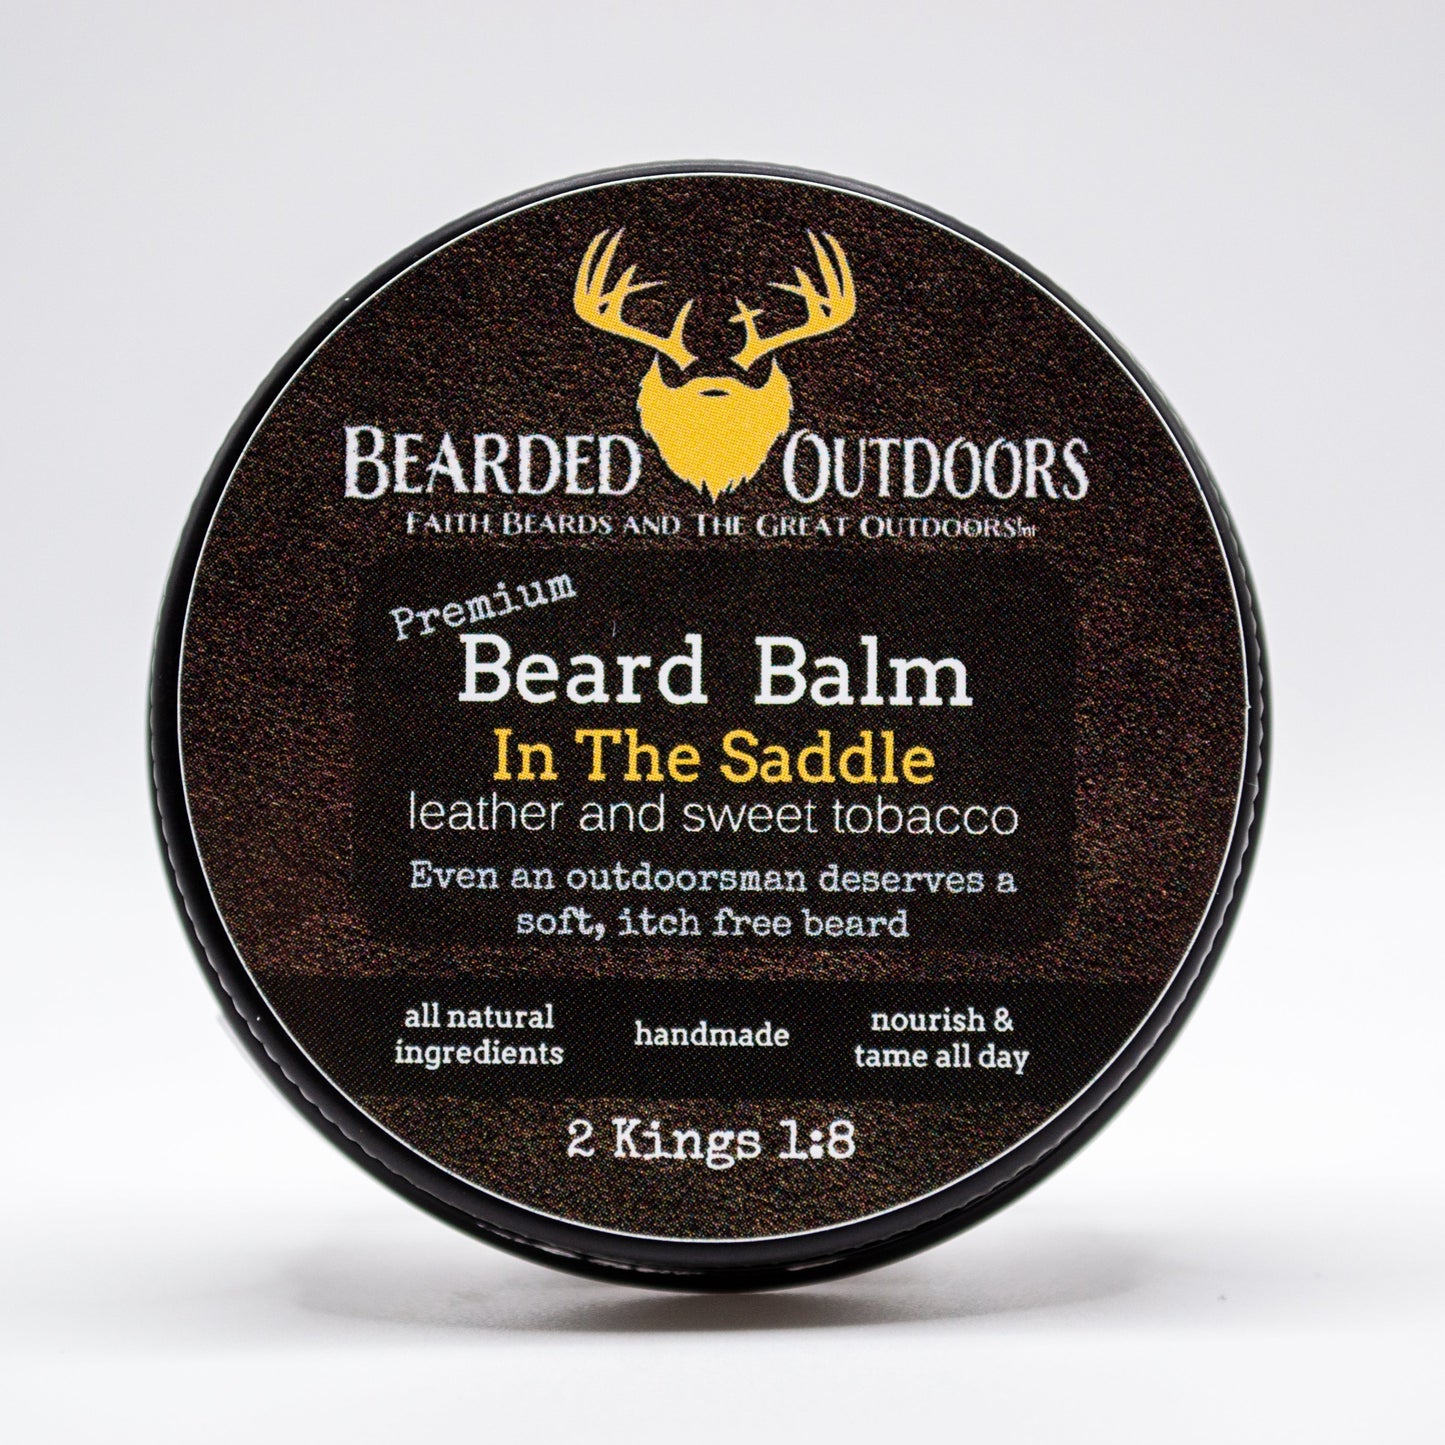 In The Saddle (Leather and Sweet Tobacco Scented) Premium Beard Balm by Bearded Outdoors